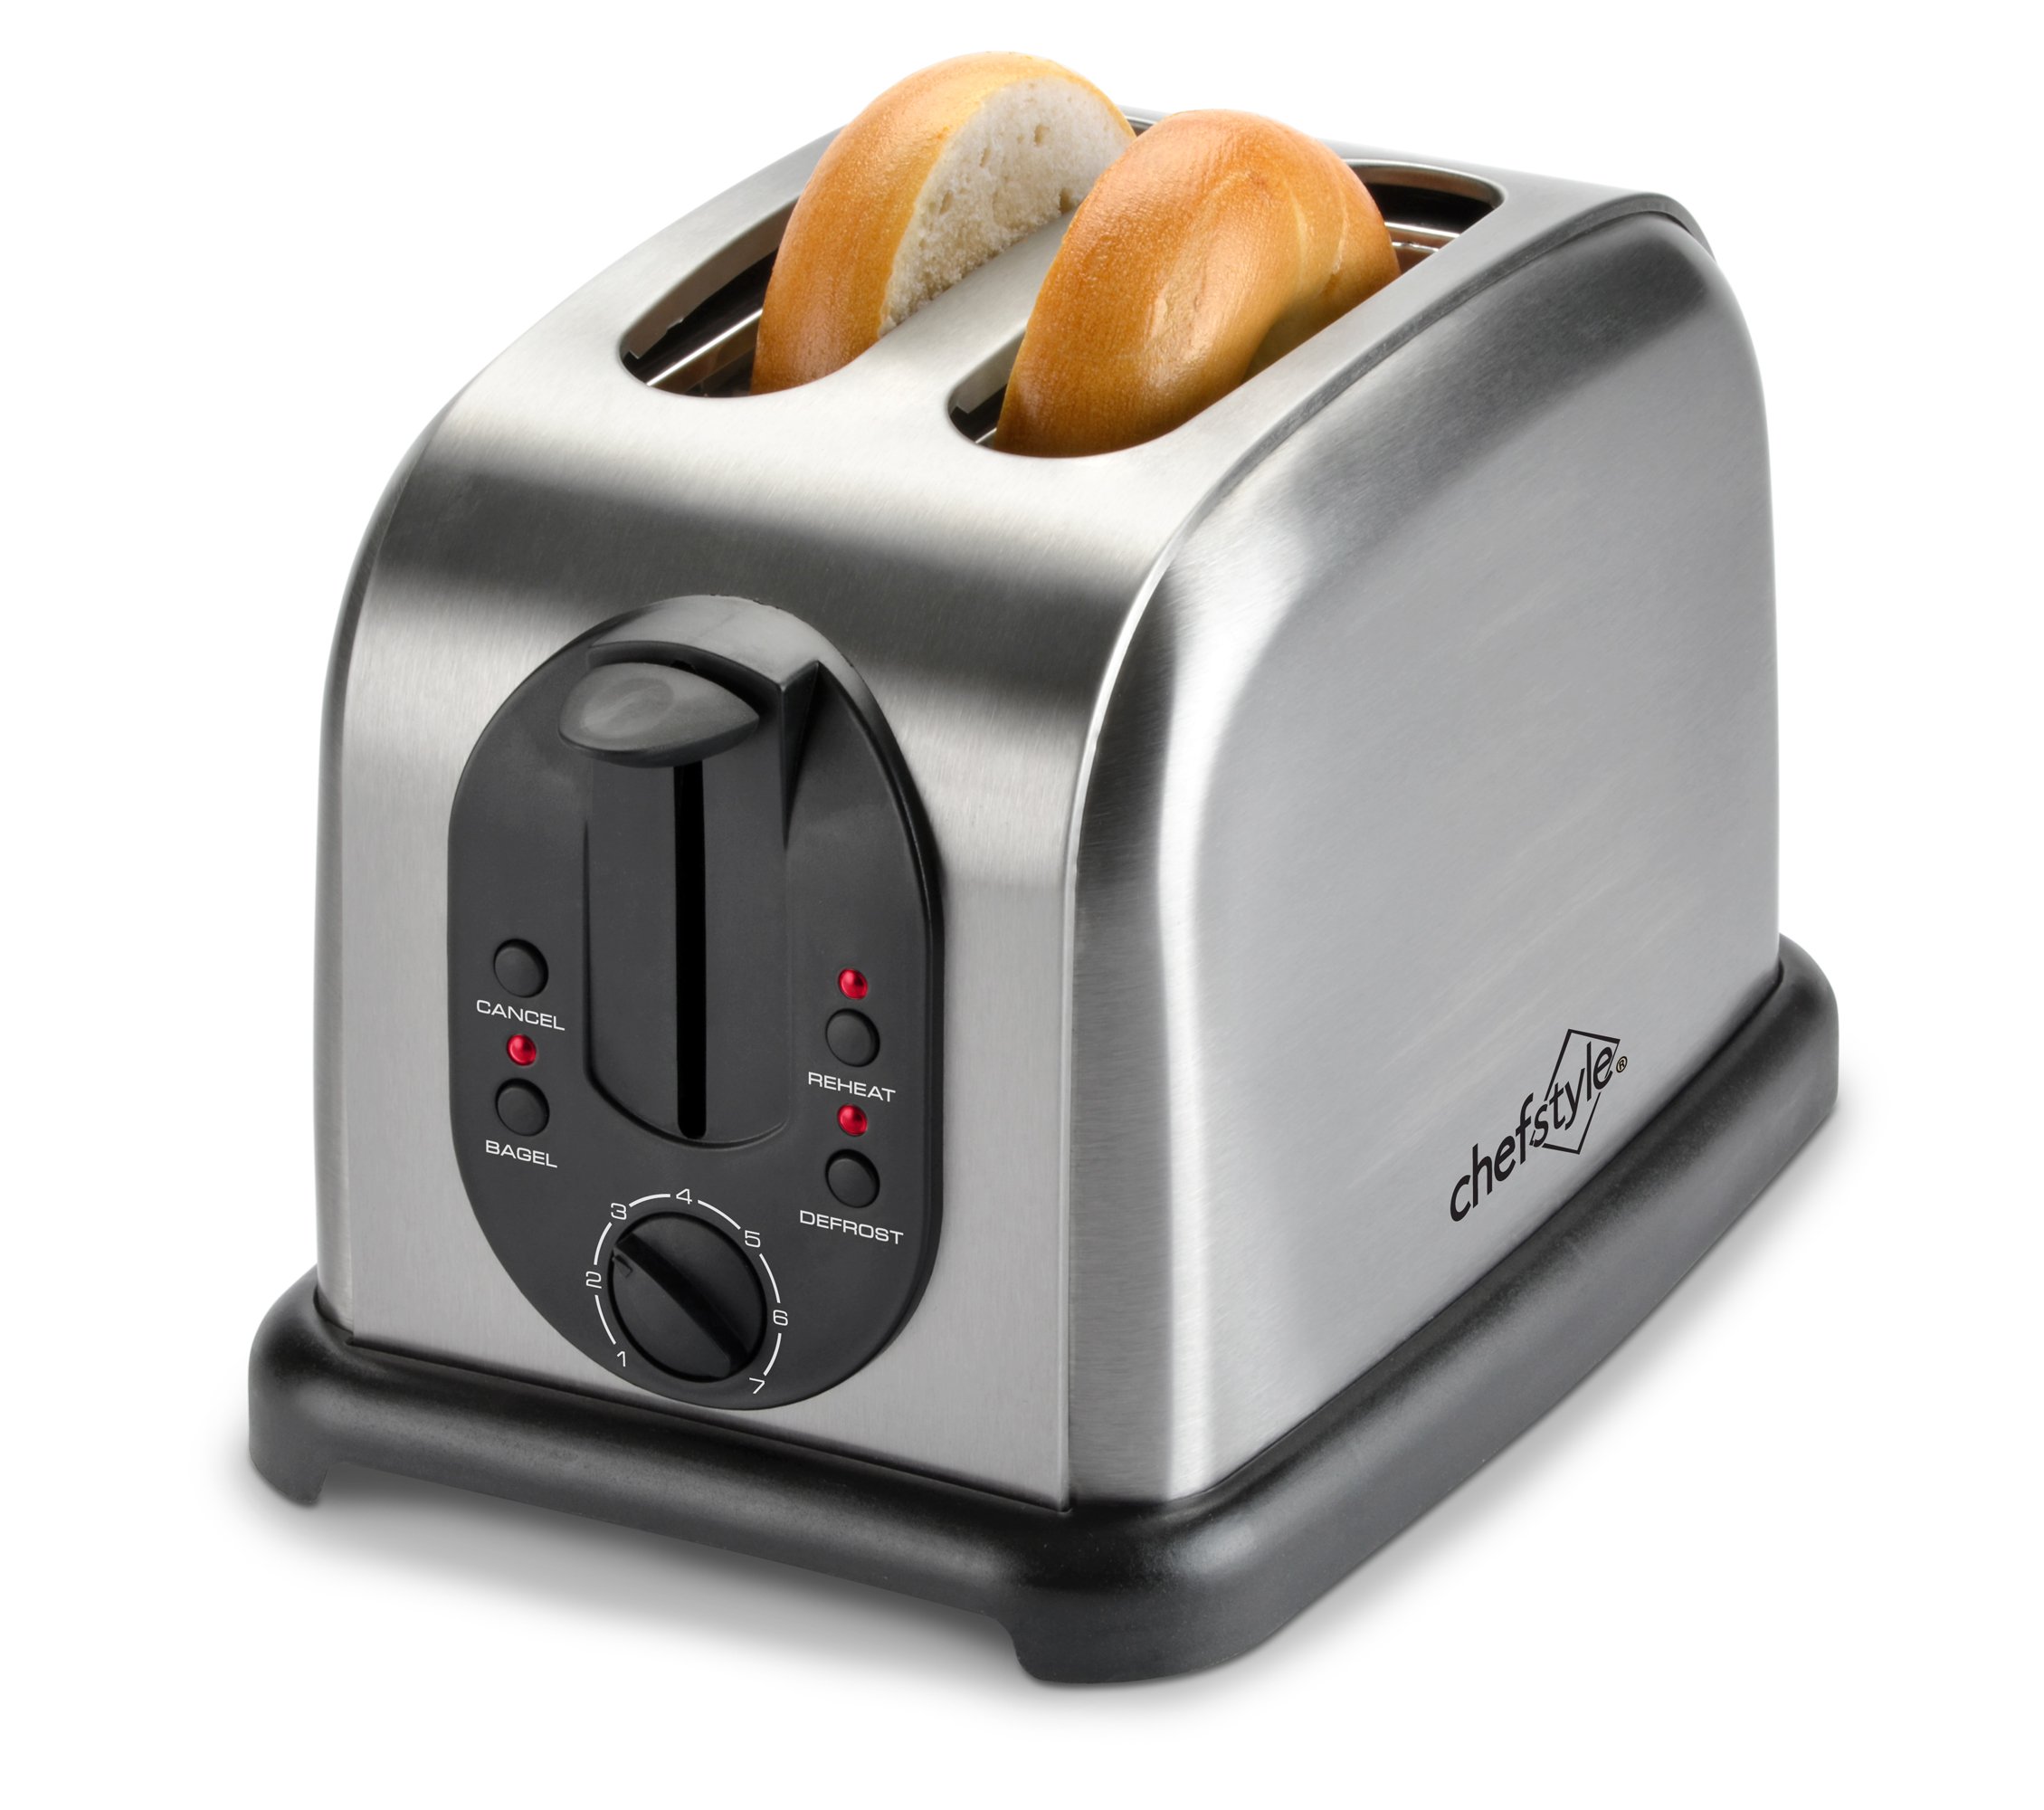 our goods 2 Slice Toaster - Stainless Steel - Shop Toasters at H-E-B